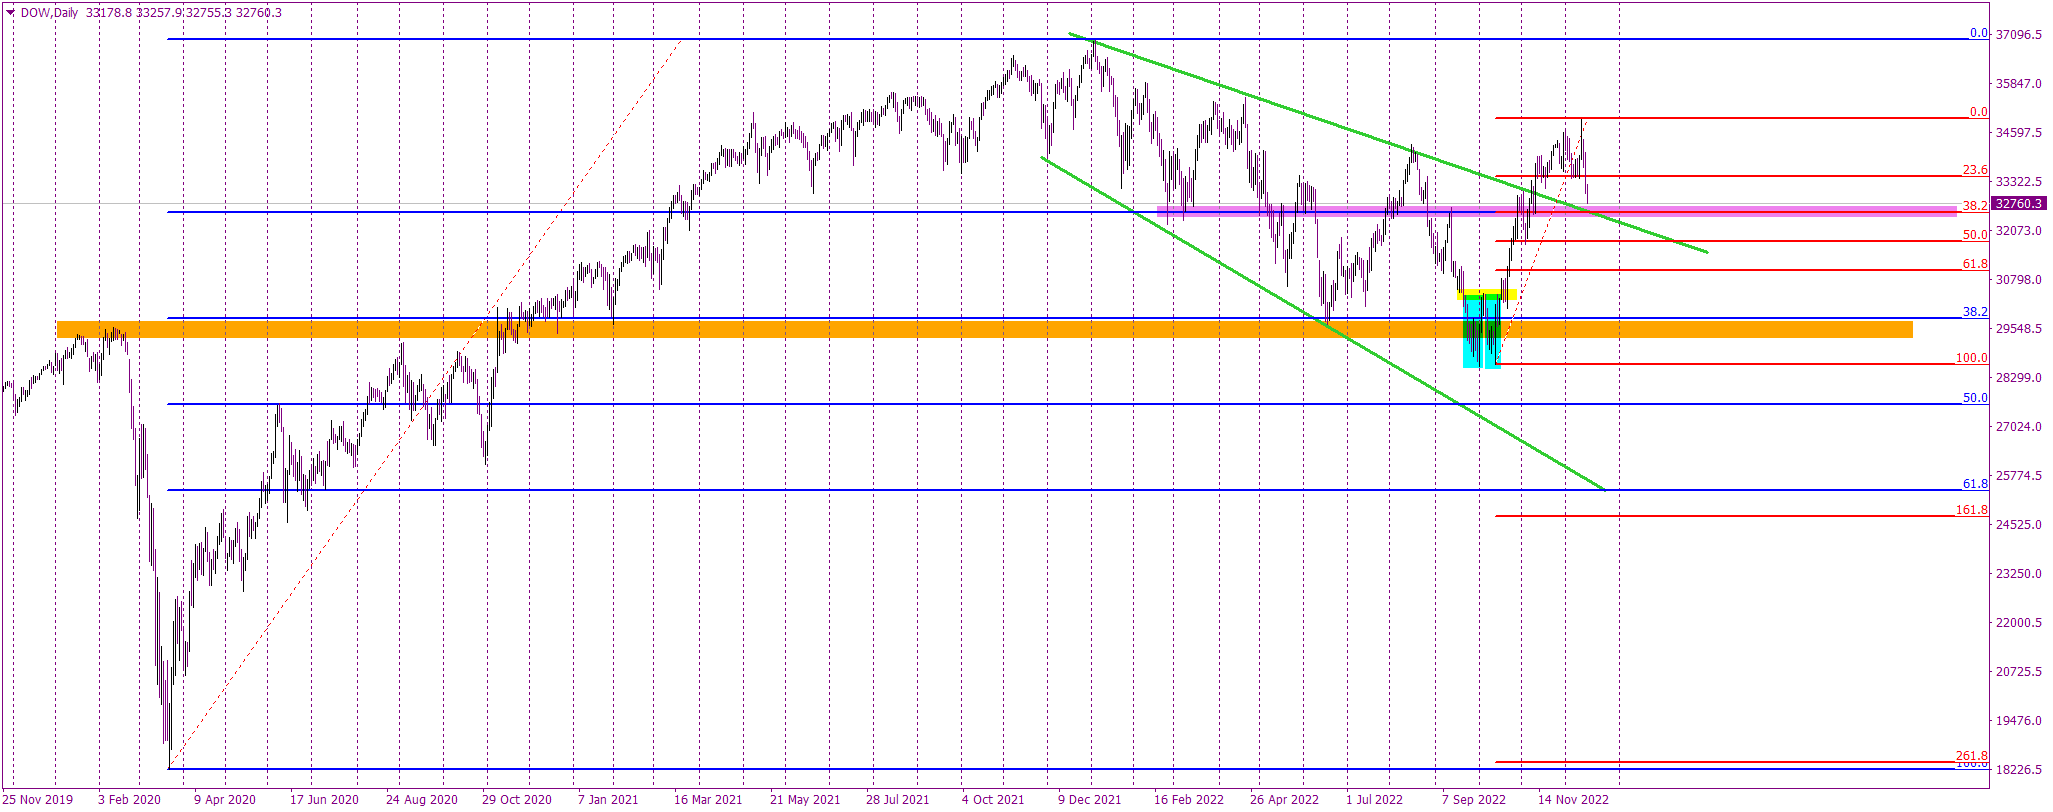 Dow Jones aims the key, long-term support